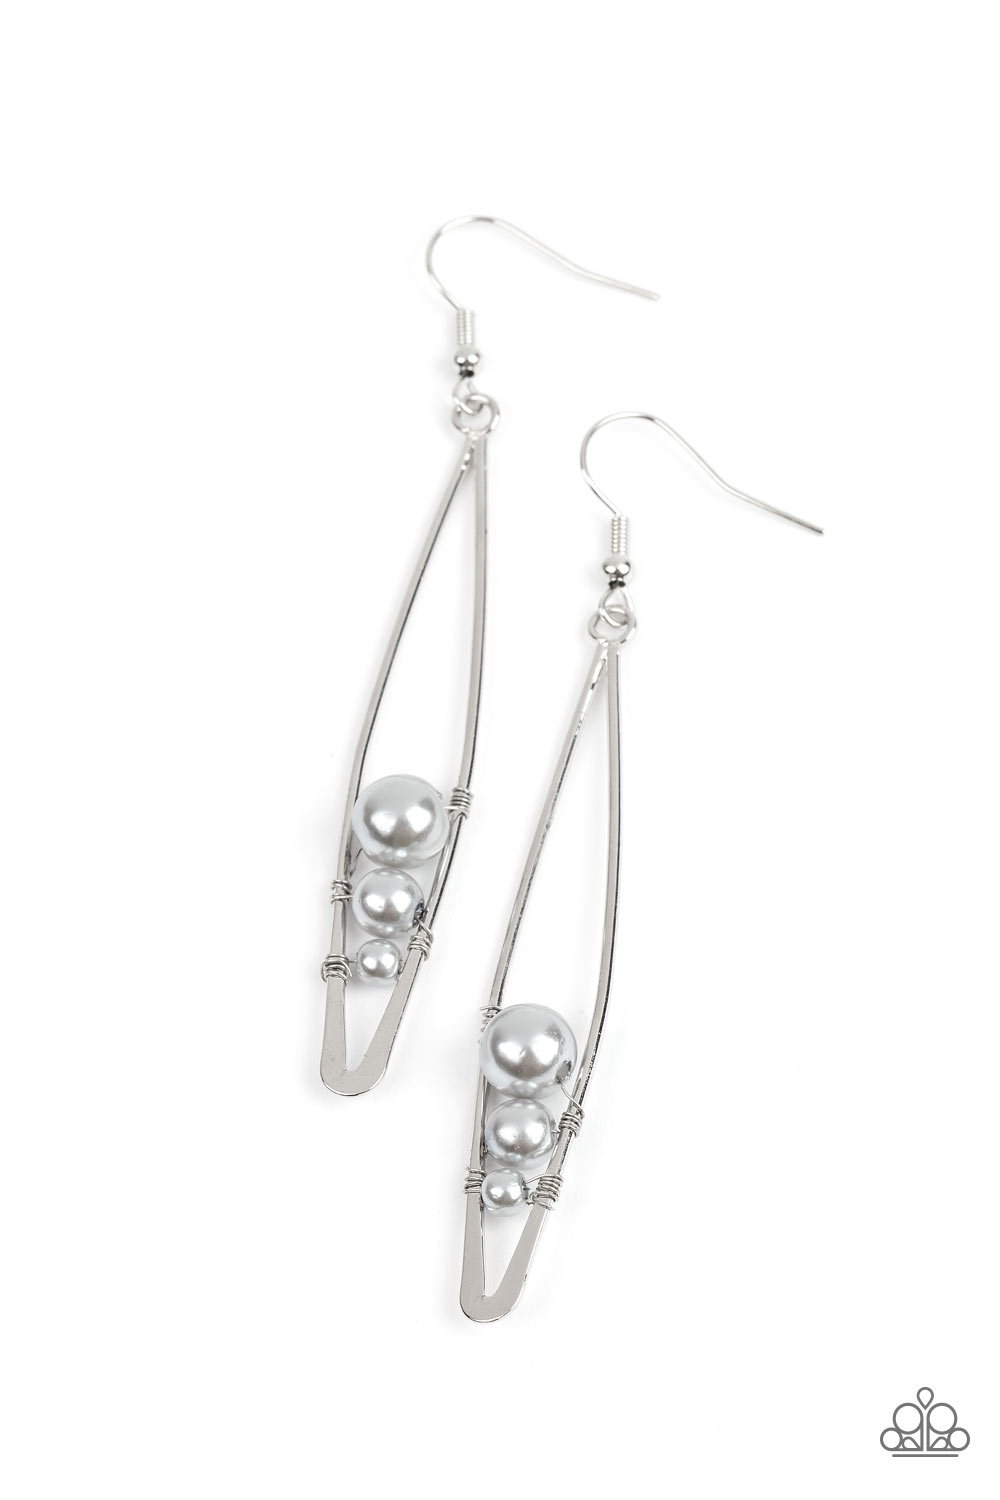 Atlantic Allure - Gray Pearl and Silver Earrings - Threaded along dainty silver wires, shimmery gray pearls decrease in size as they tumble down the bottom of an elongated silver frame for a modern twist.